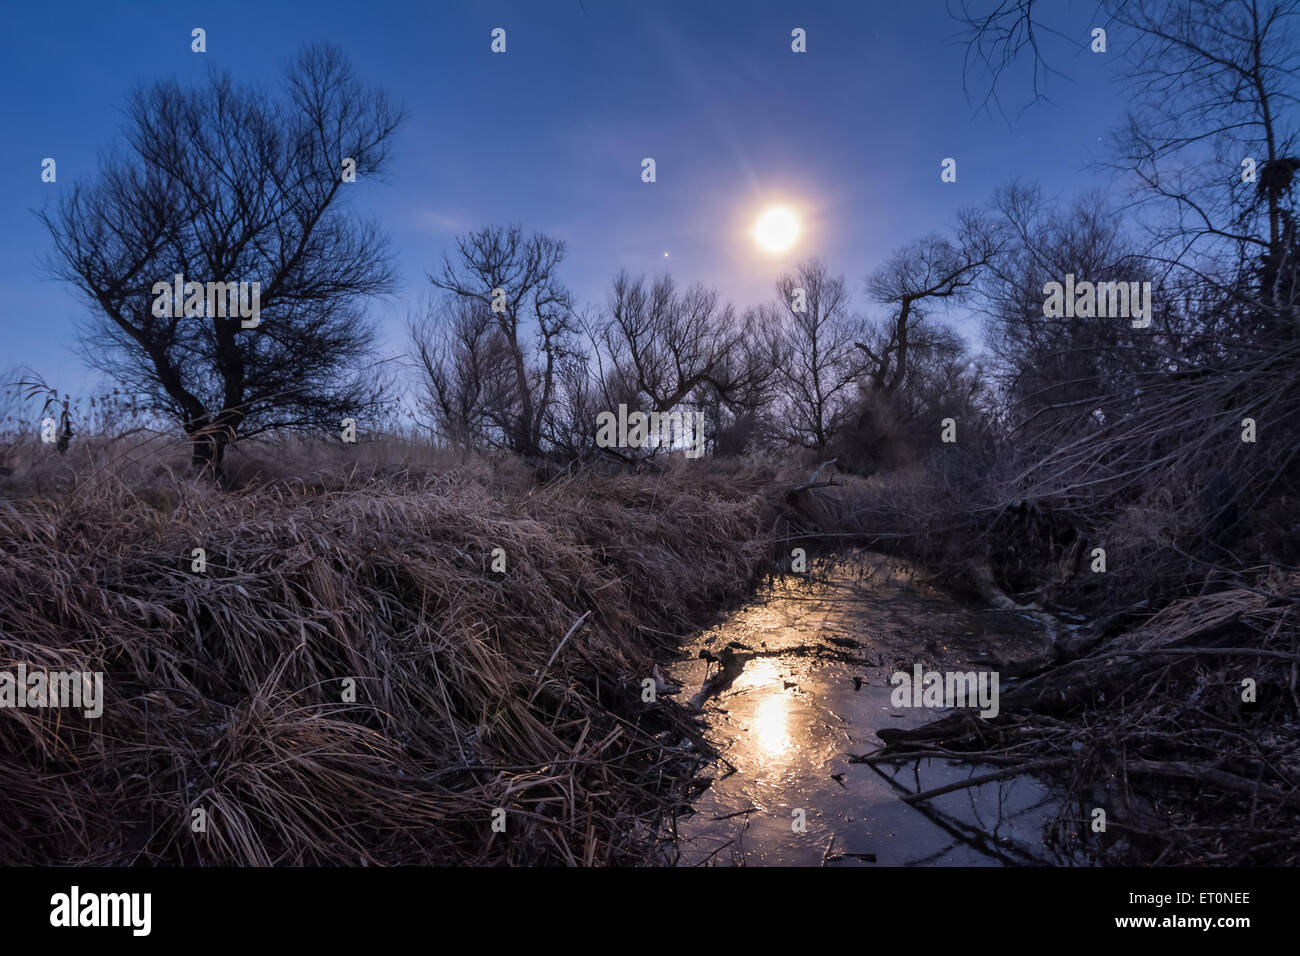 Unusual full moon night light with cane and trees silhoettes Stock Photo